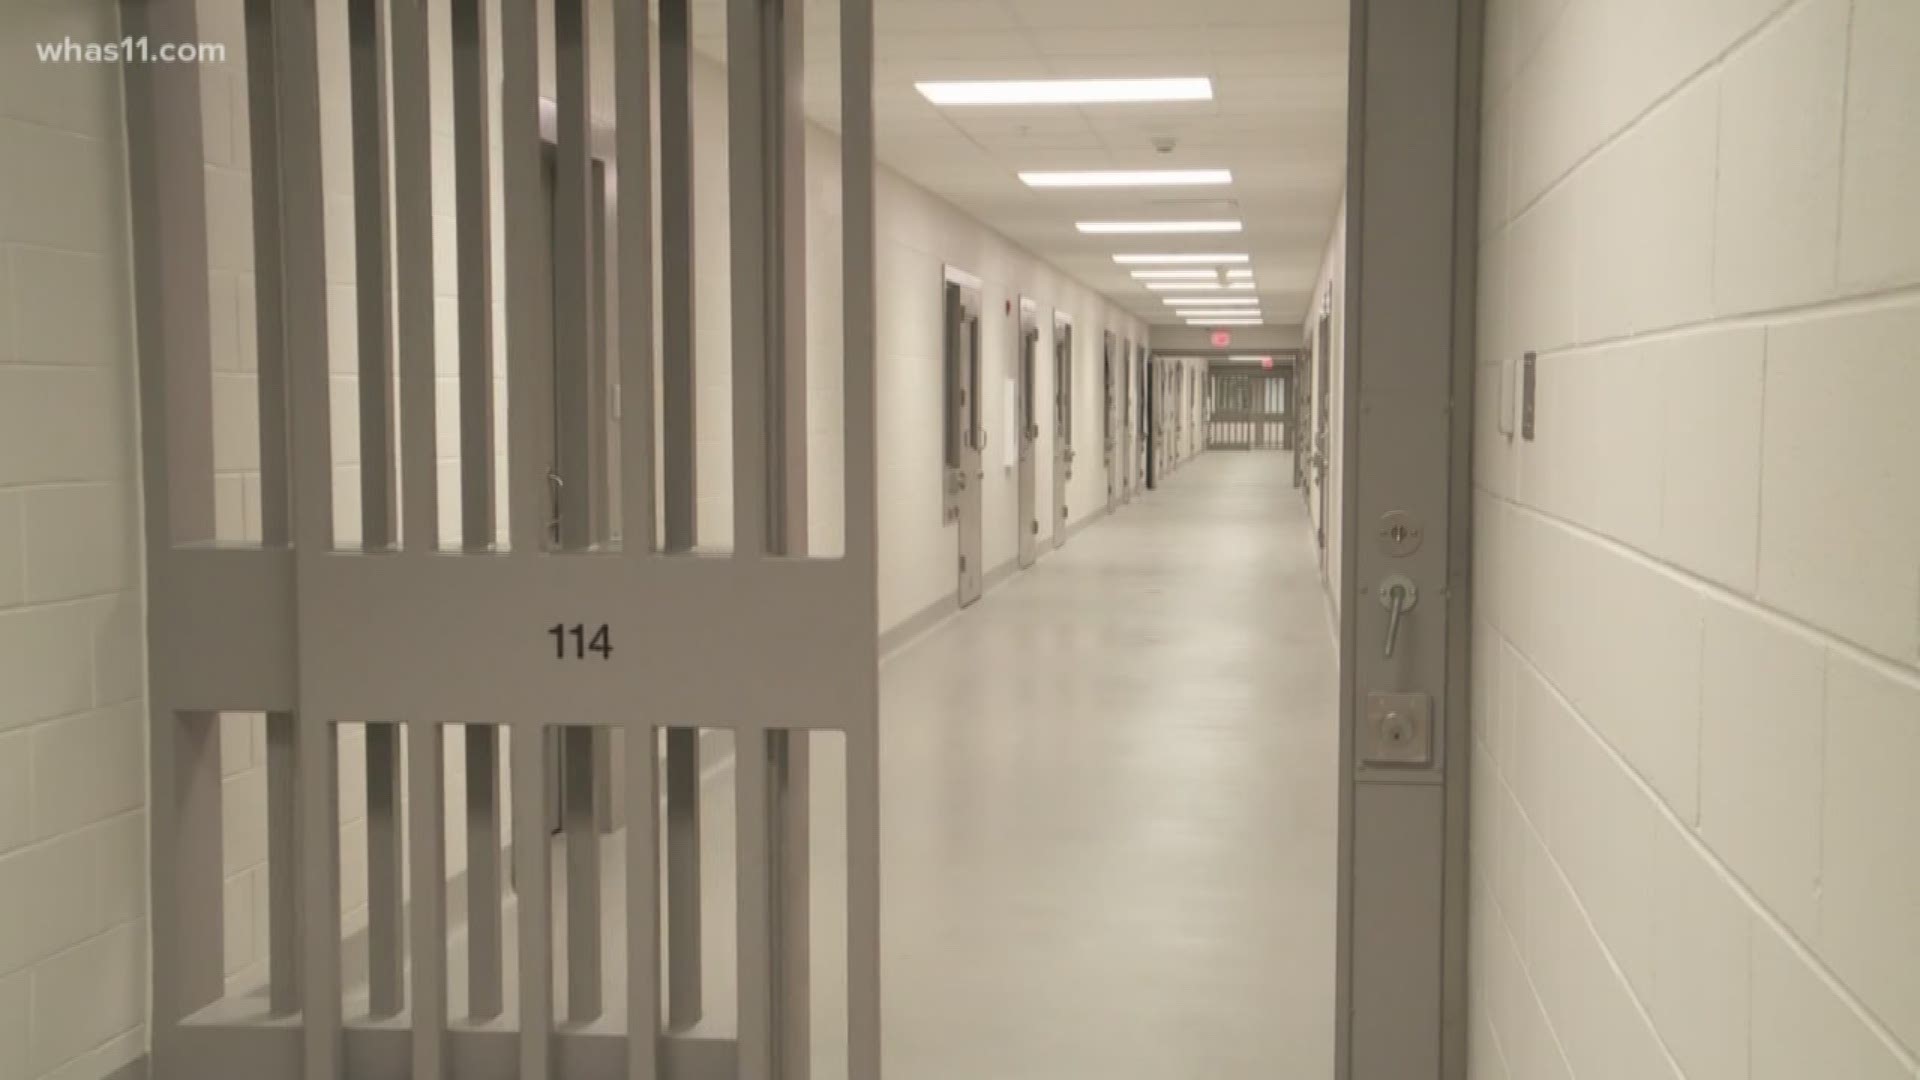 Budgets cuts could shift power of the Jefferson County Juvenile Detention Center to the state.